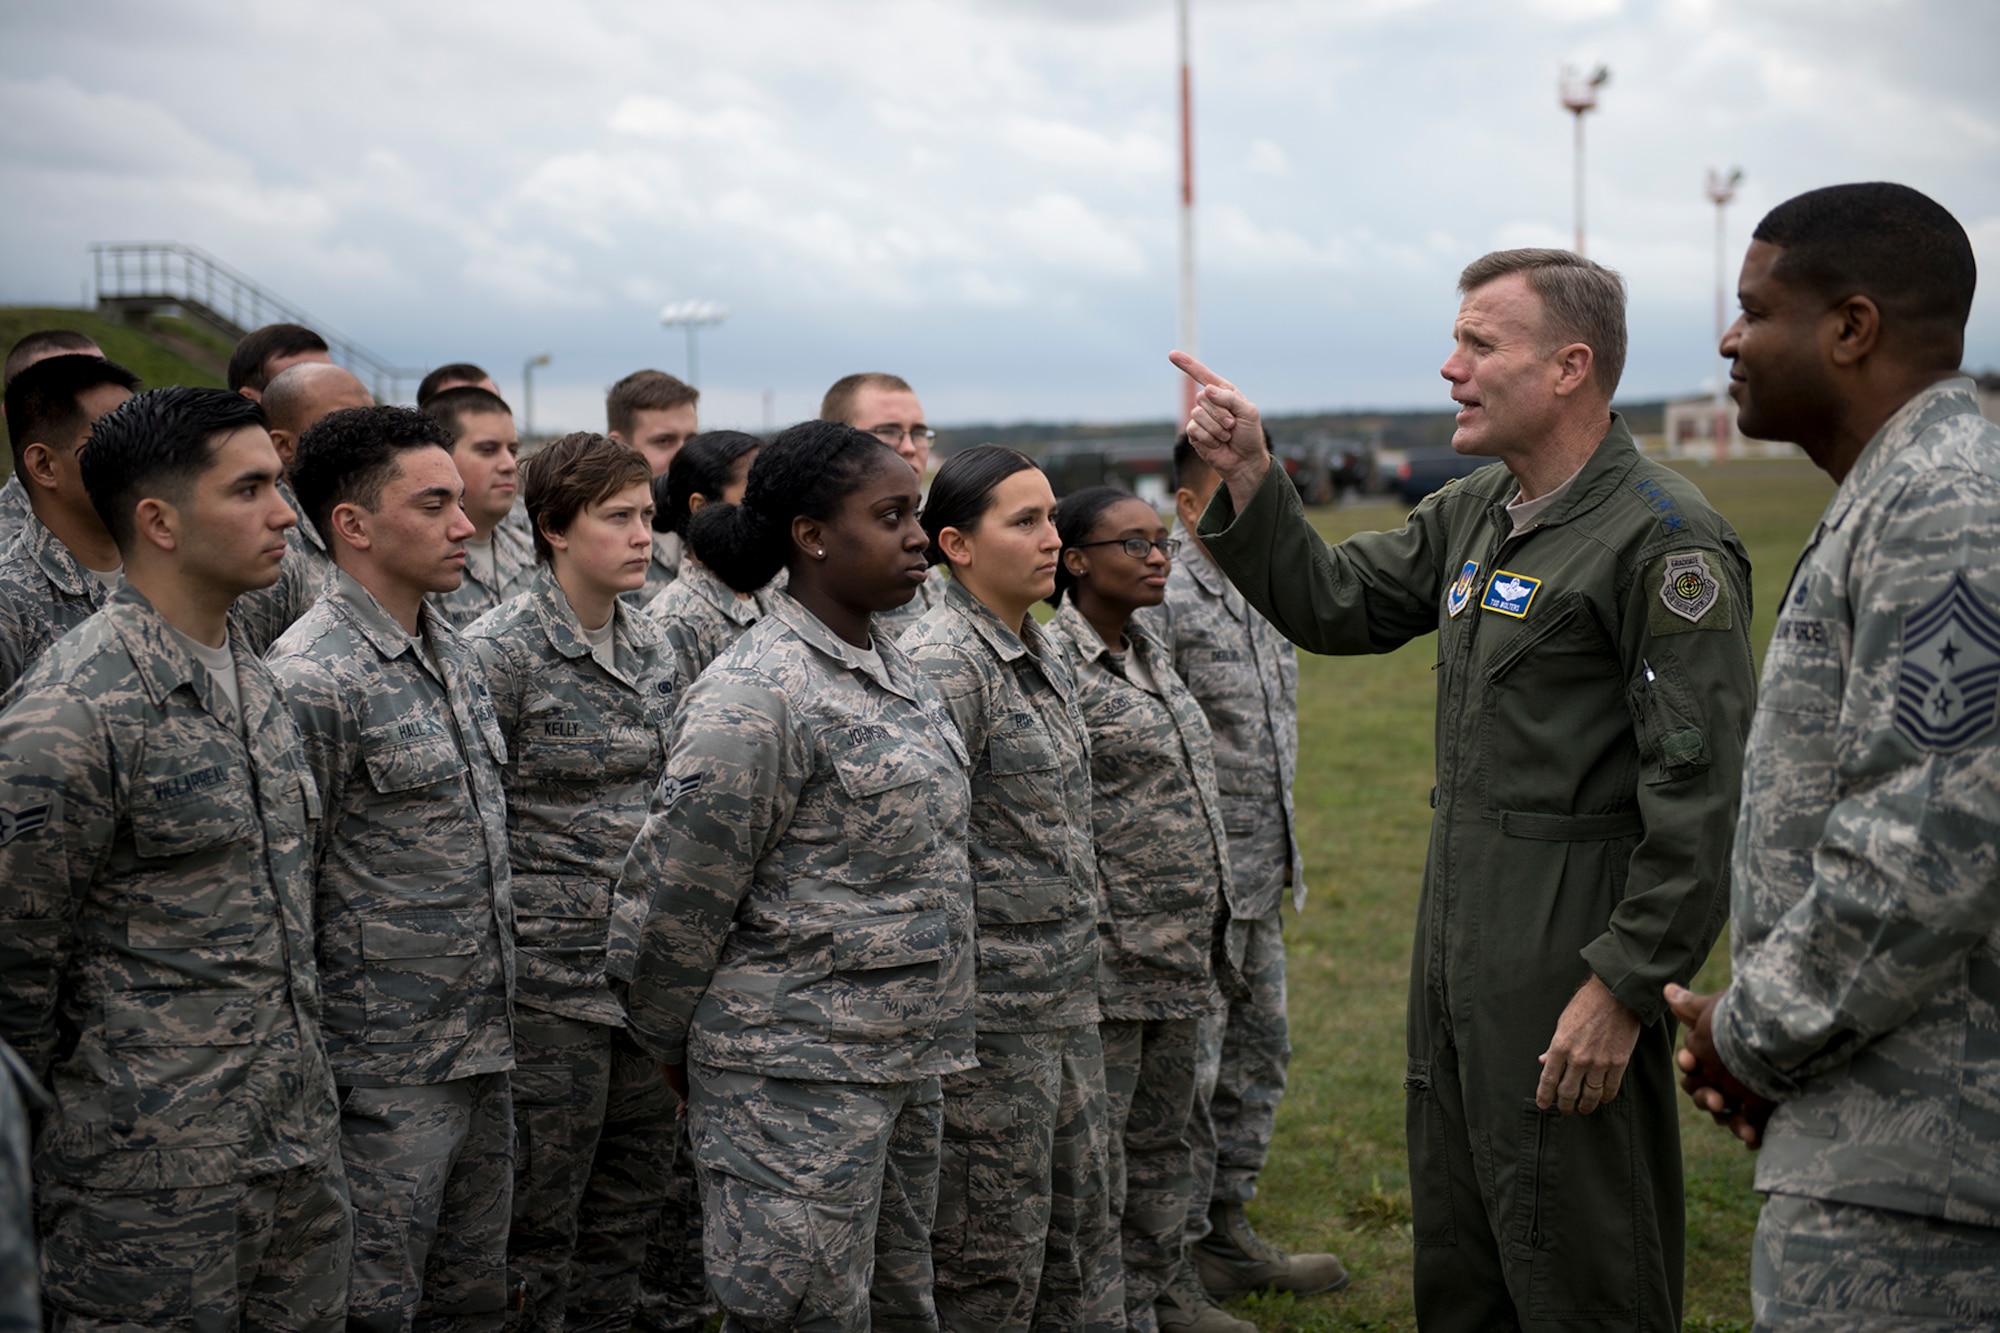 U.S. Air Force Gen. Tod D. Wolters, U.S. Air Forces in Europe and Air Forces Africa commander, speaks to Airmen assigned to the 86th Logistics Readiness Squadron Fuels Management Flight on Ramstein Air Base, Germany, Oct. 23, 2017. Wolters met with the Airmen to get a better understanding of what they do in support of the mission here and to thank them for their hard work. (U.S. Air Force photo by Senior Airman Devin Boyer)